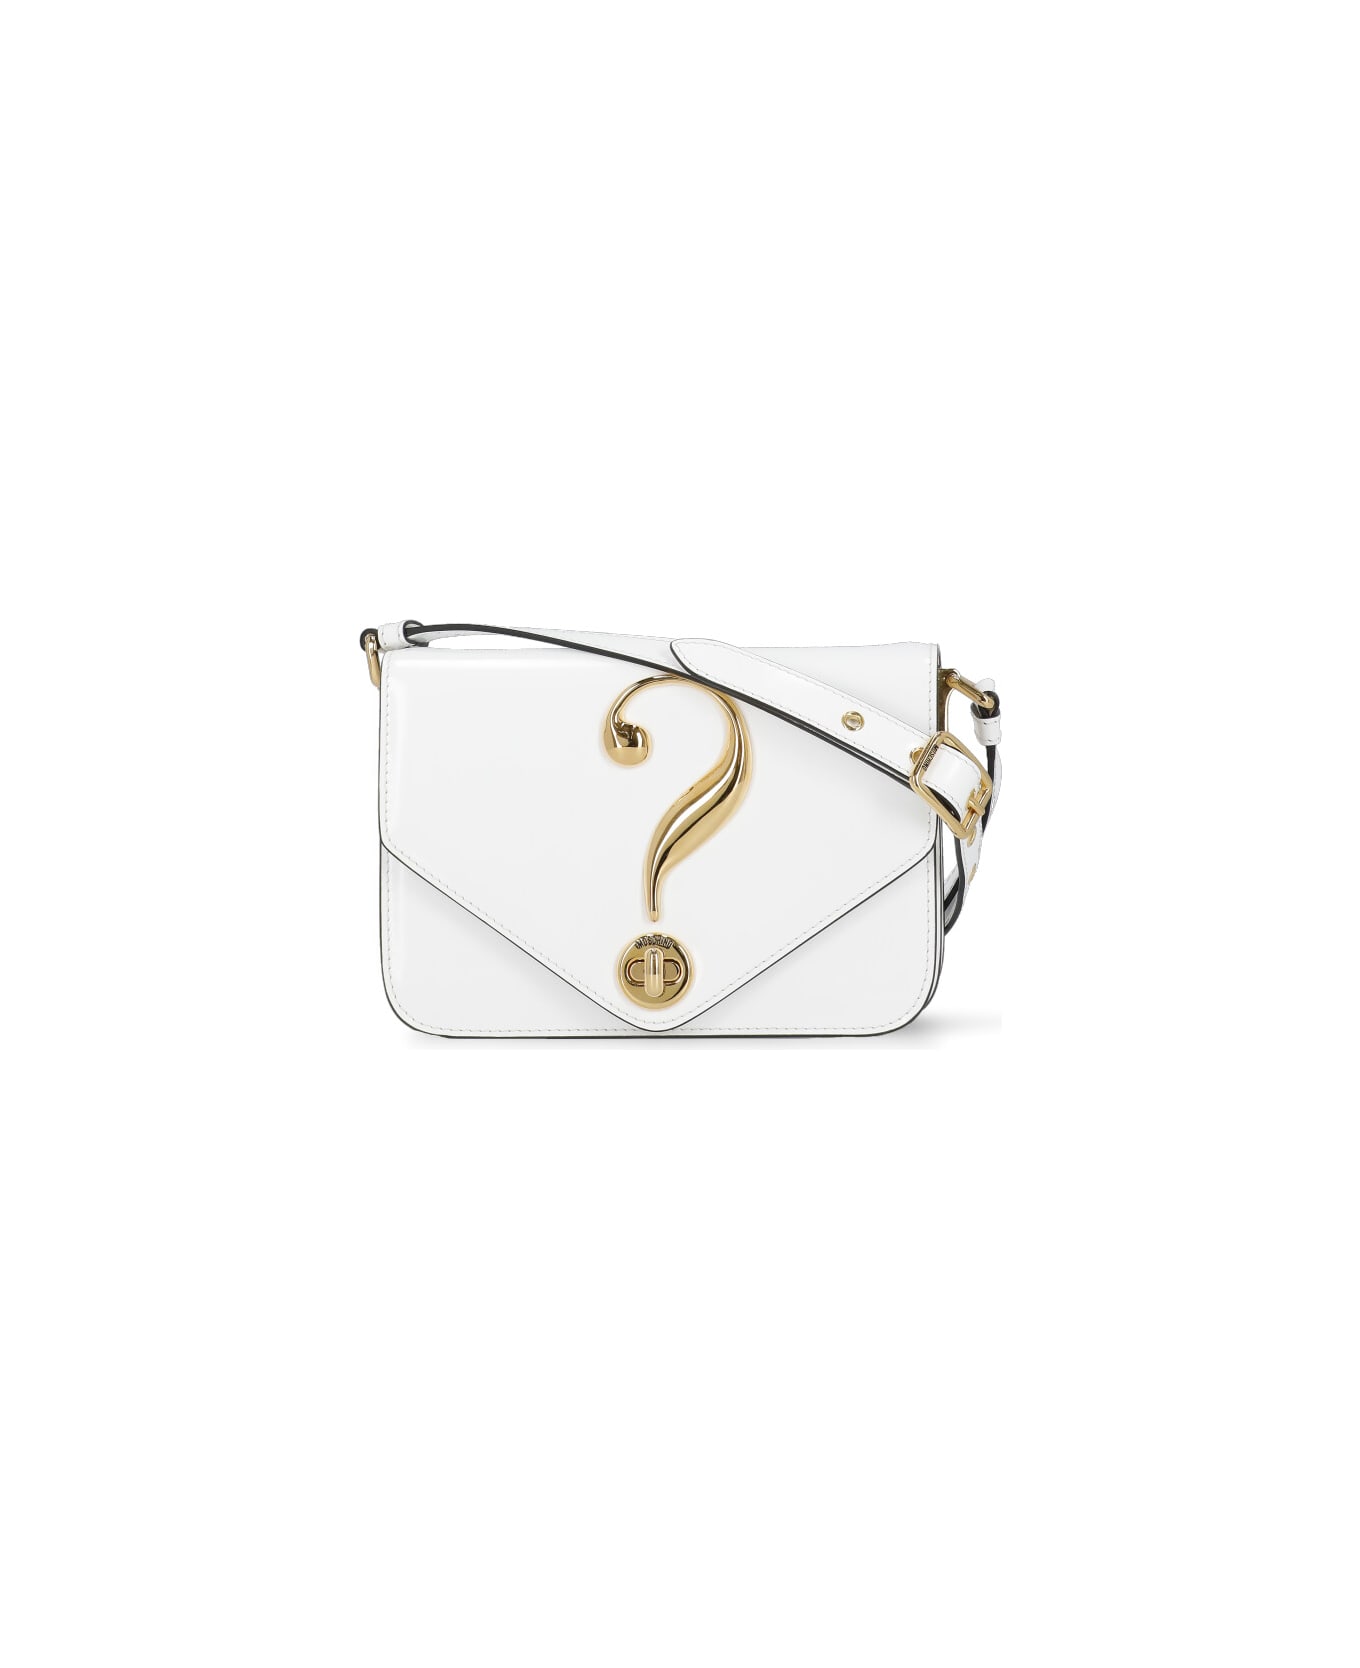 Moschino Leather Shoulder Bag - White